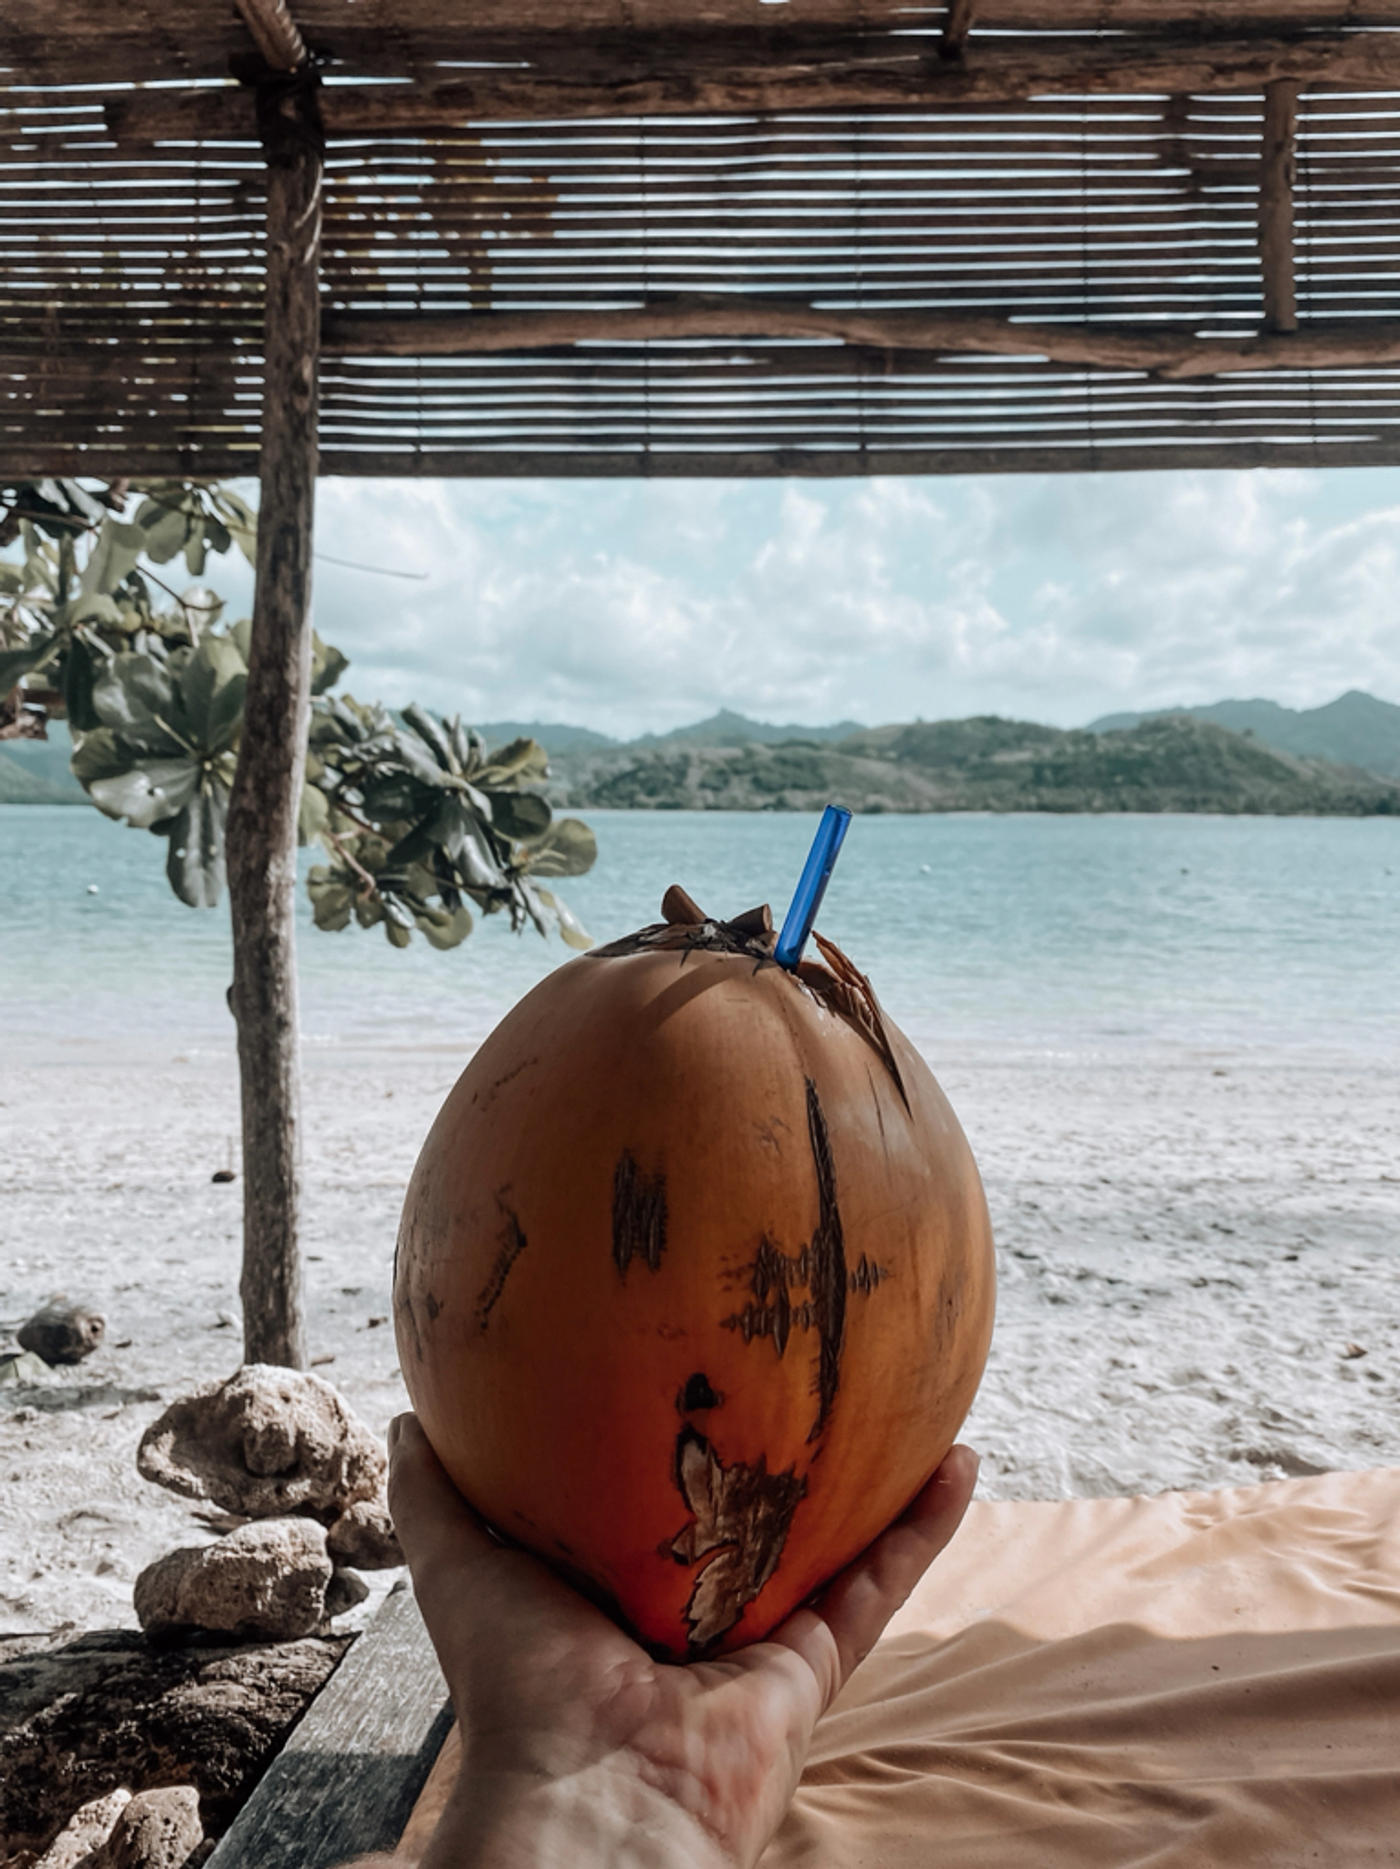 Coconut love with a view 🥥